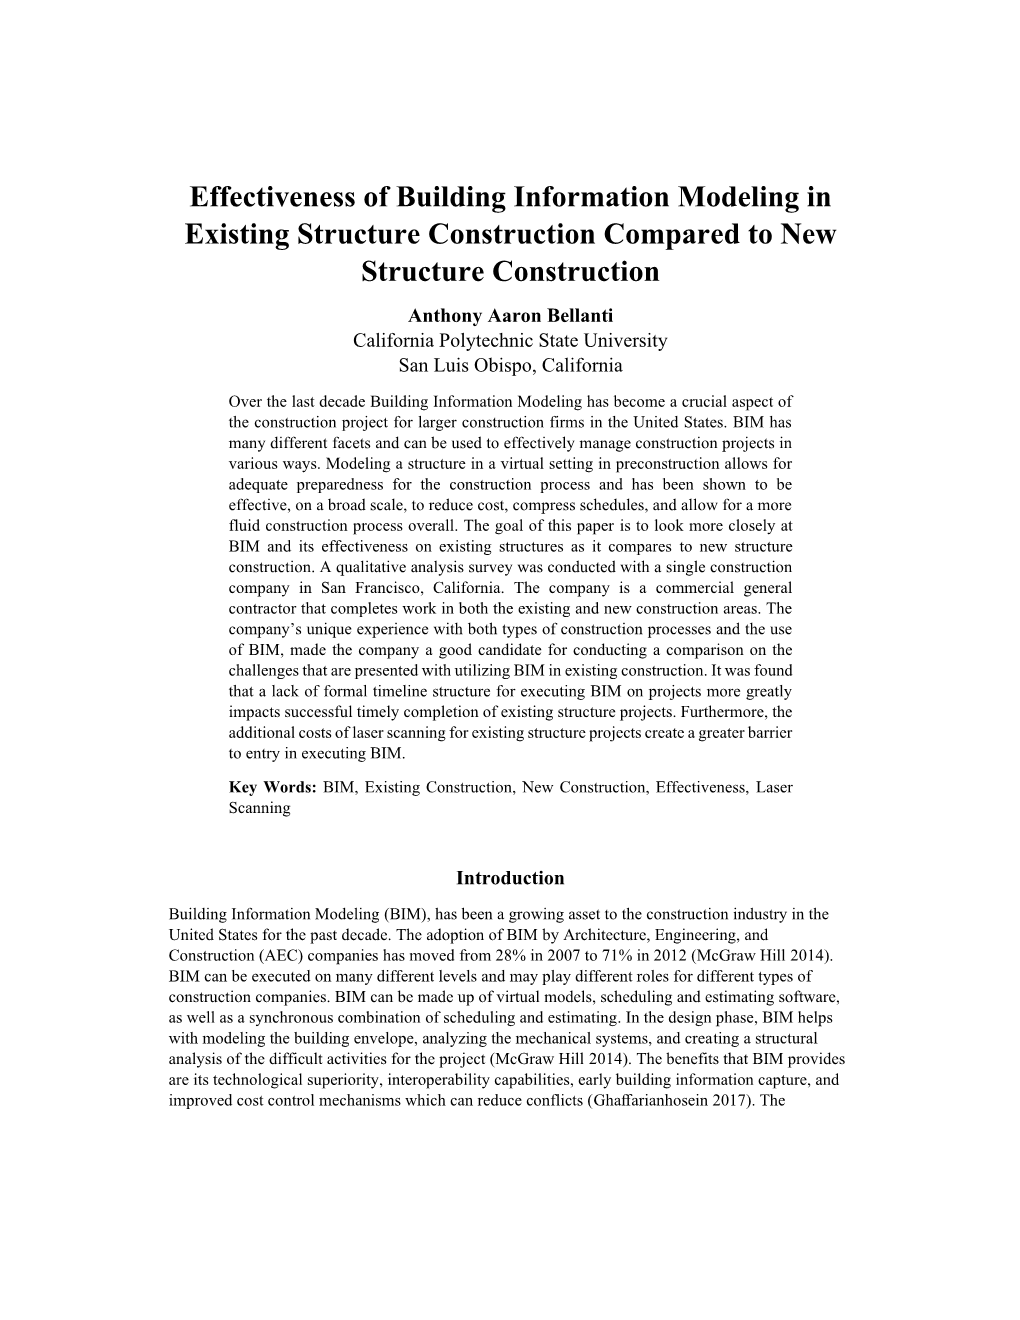 Effectiveness of Building Information Modeling in Existing Structure